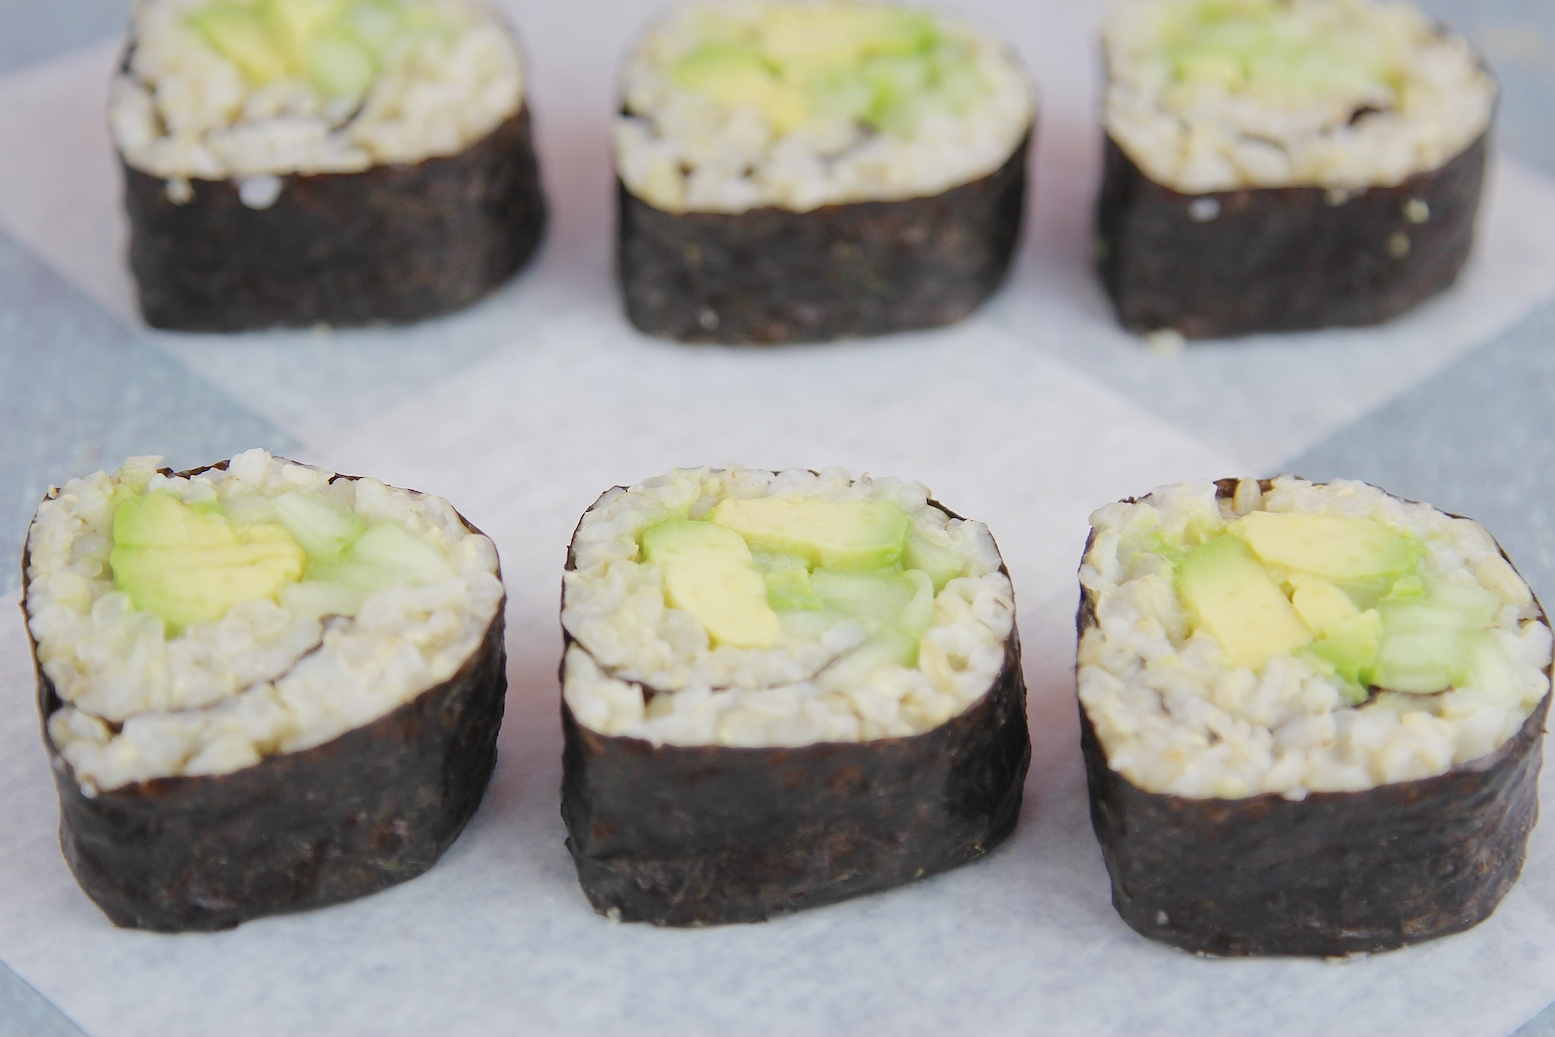 make your own avocado cucumber and brown rice sushi - main (c)nwafoodie AD